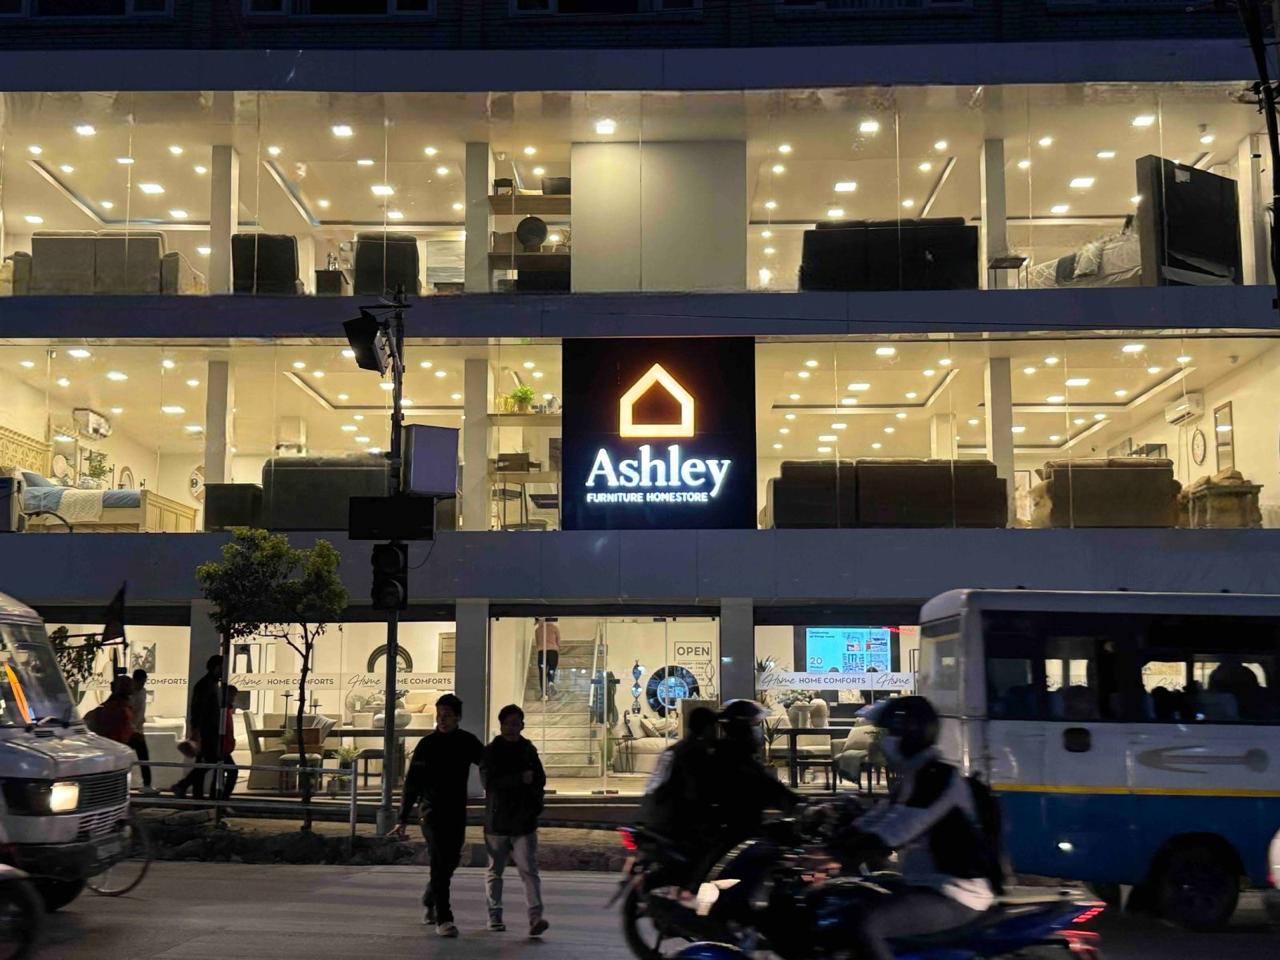 Ashley Furniture opens its first homestore in Nepal (with photos)